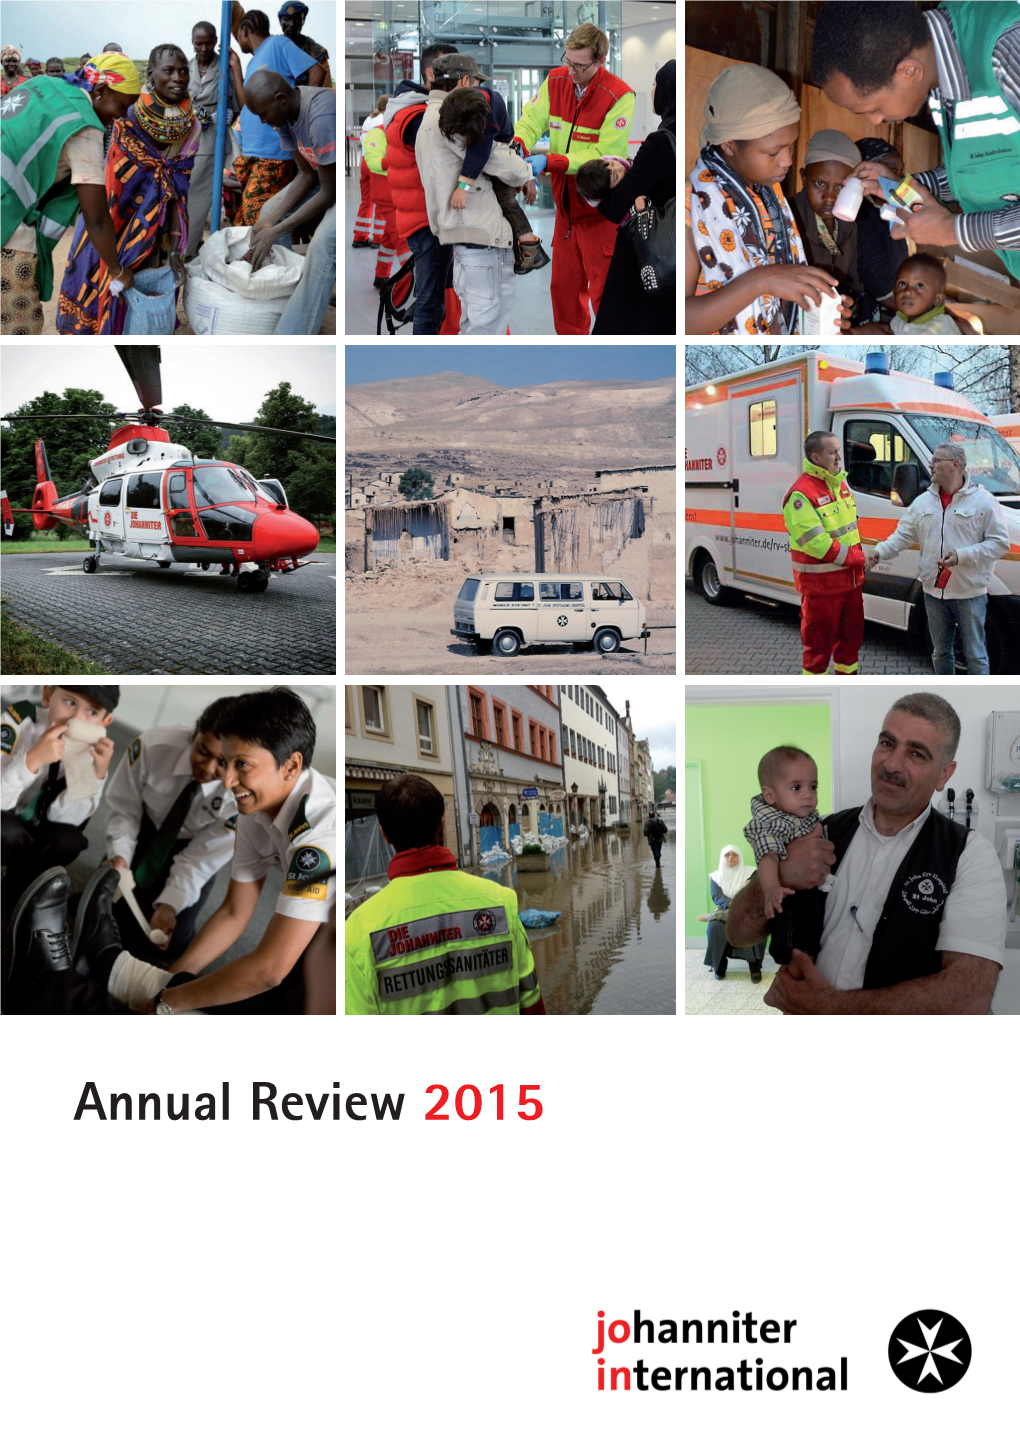 Annual Review 2015 a Message from the Chairman